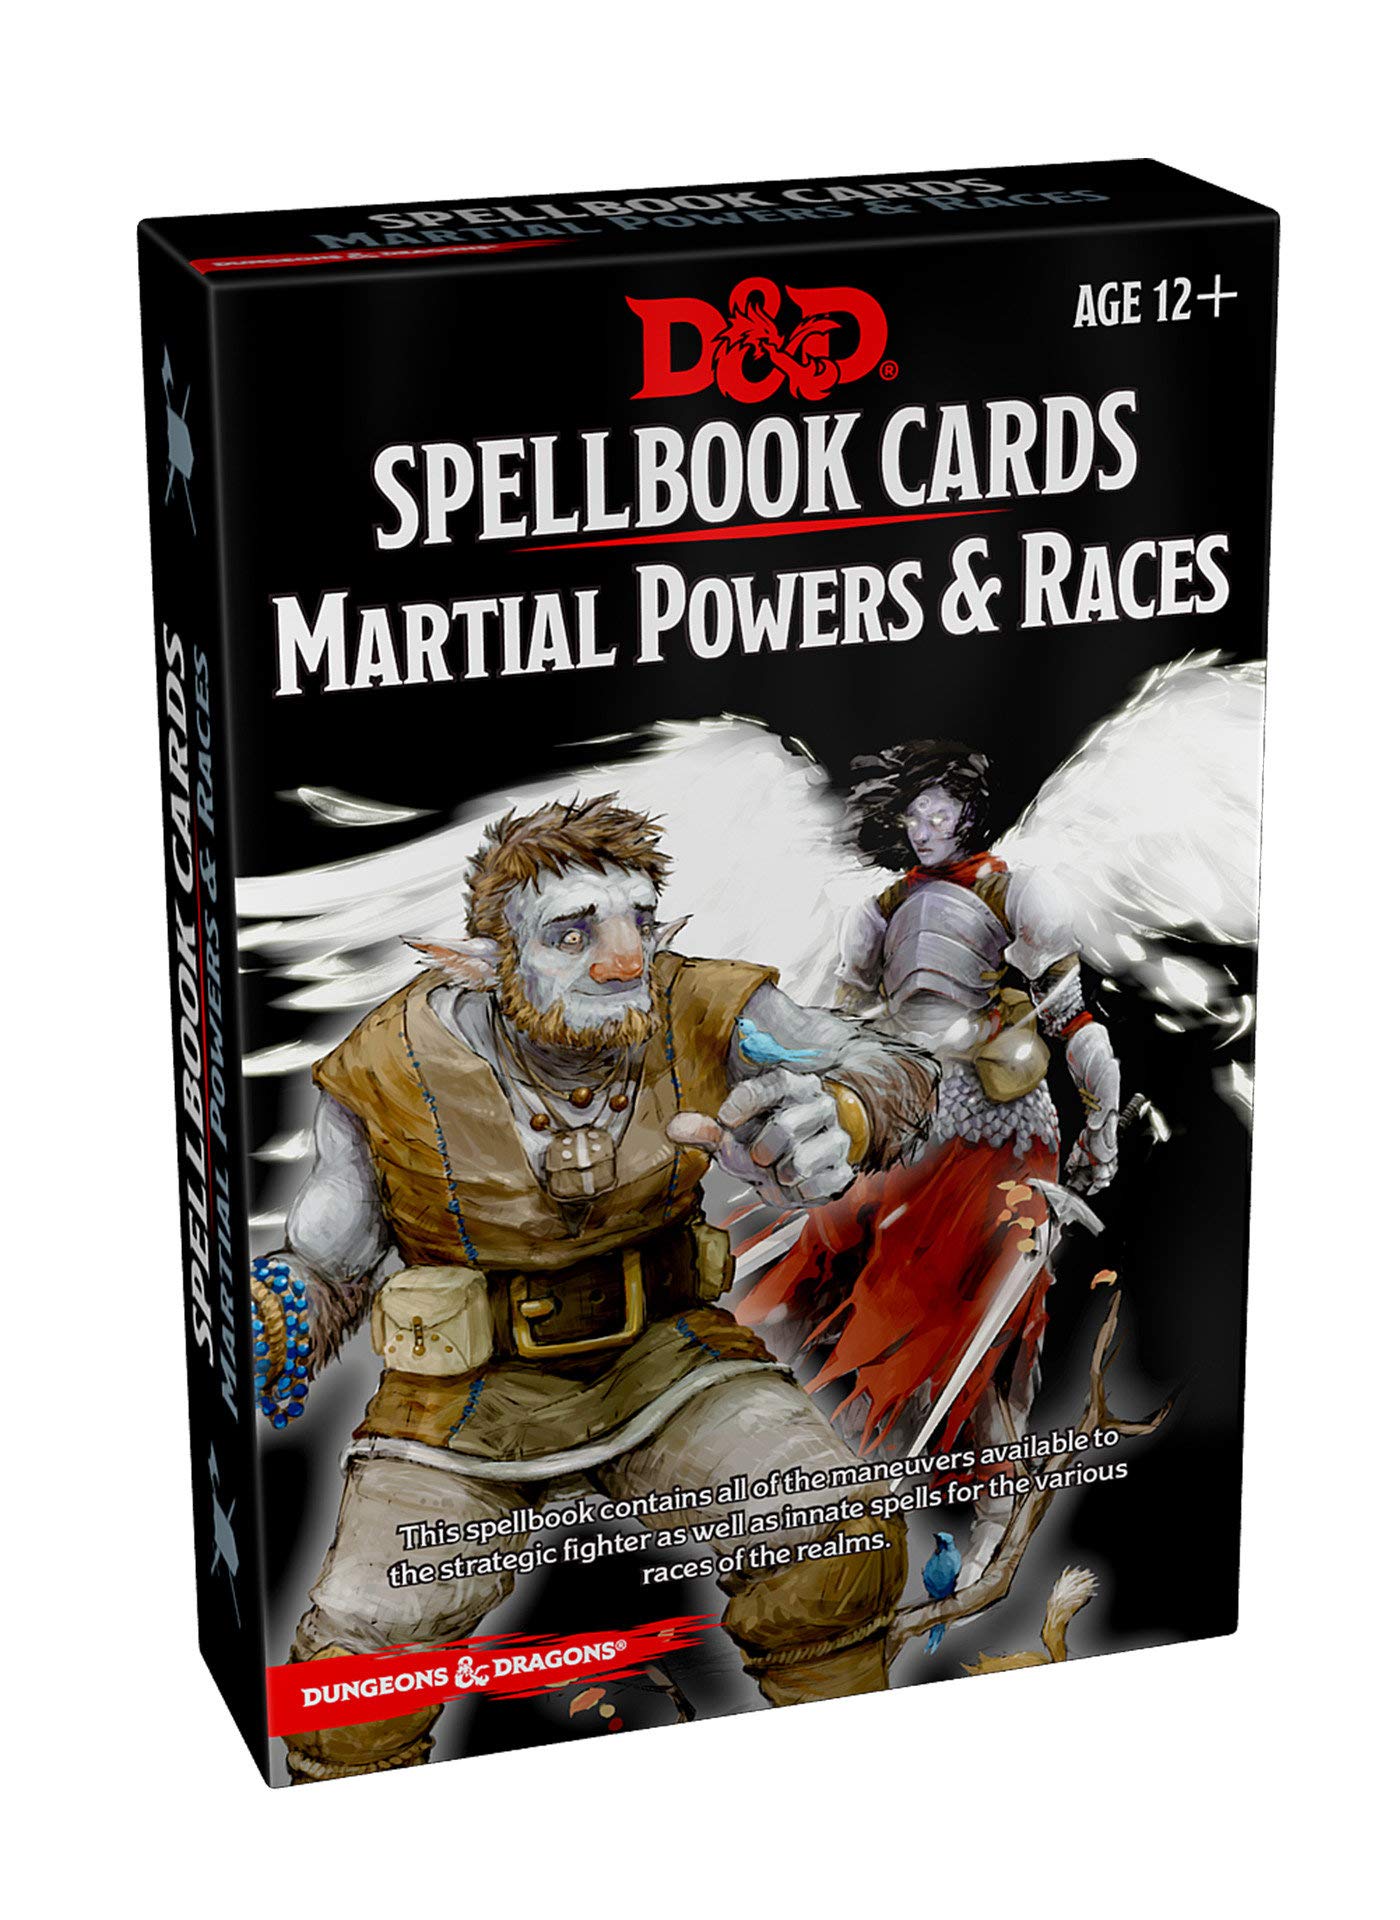 D&D Spellbook Cards Martial Powers & Races Deck (61 Cards) Revised 2017 Edition